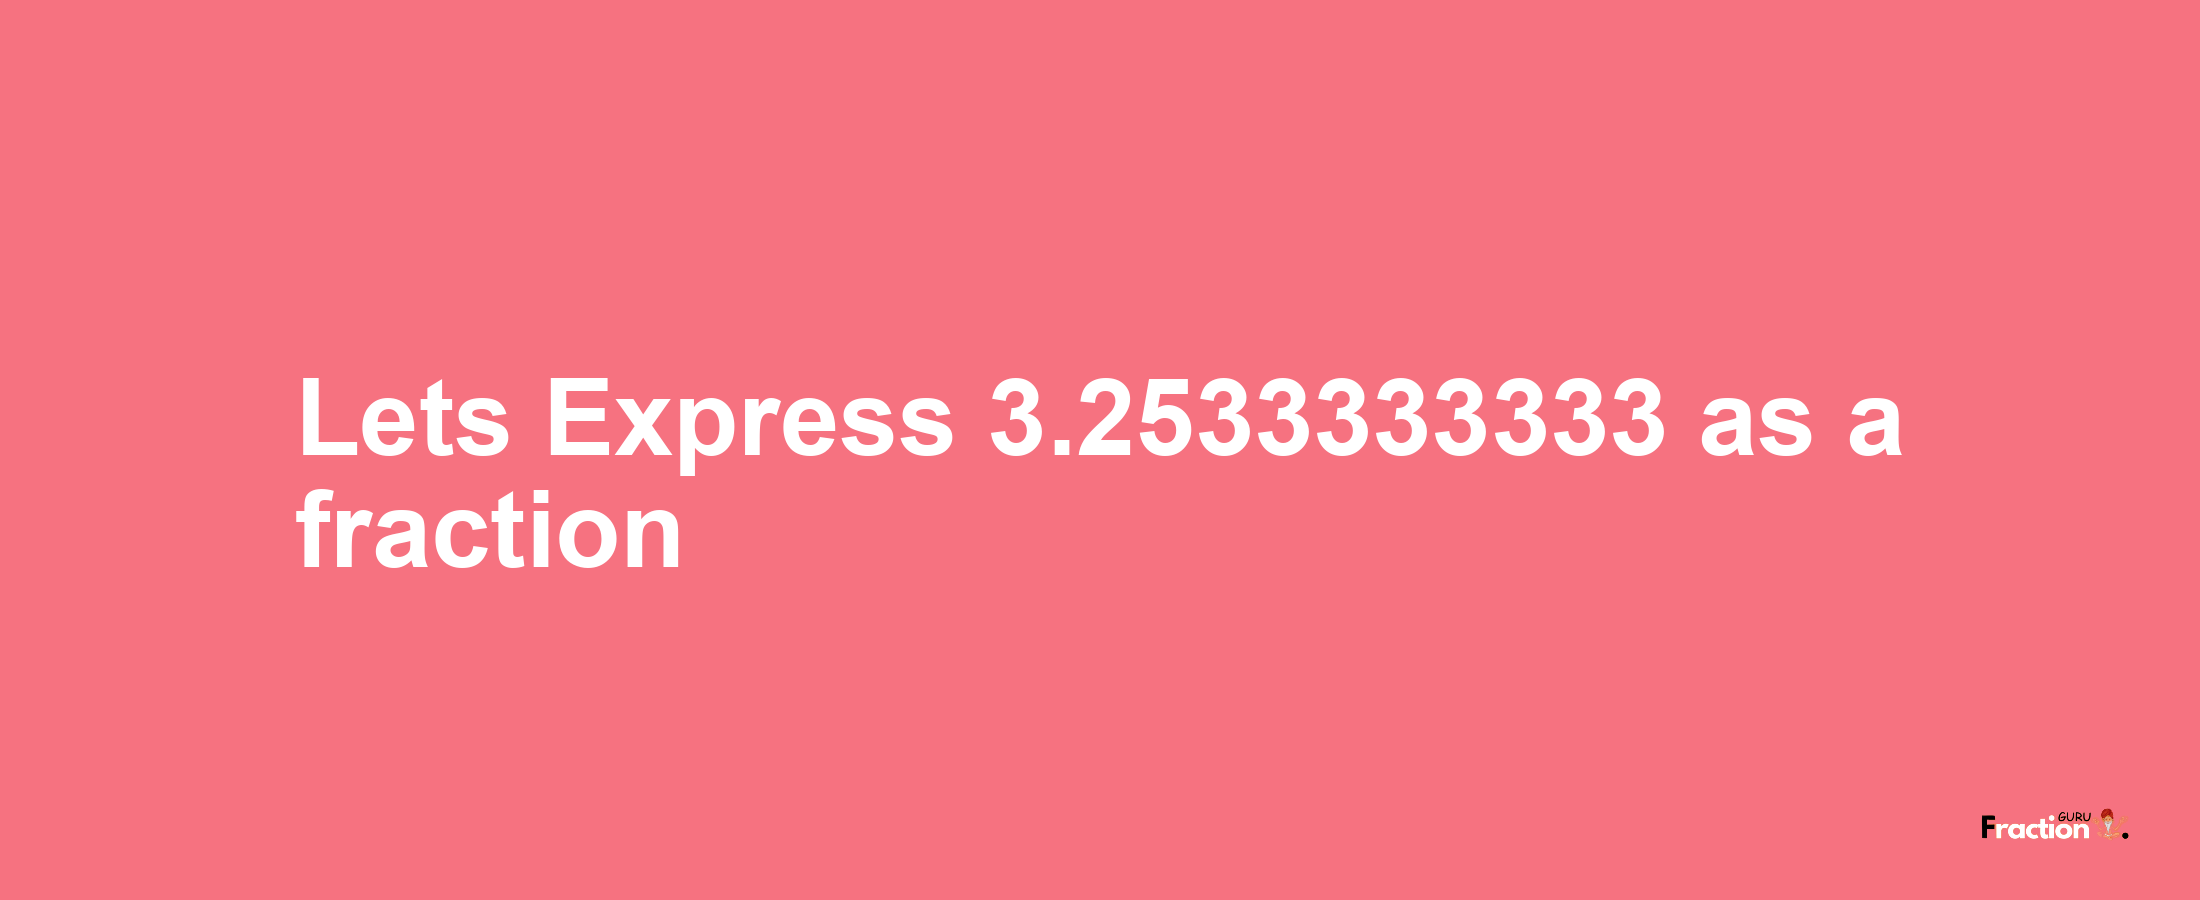 Lets Express 3.2533333333 as afraction